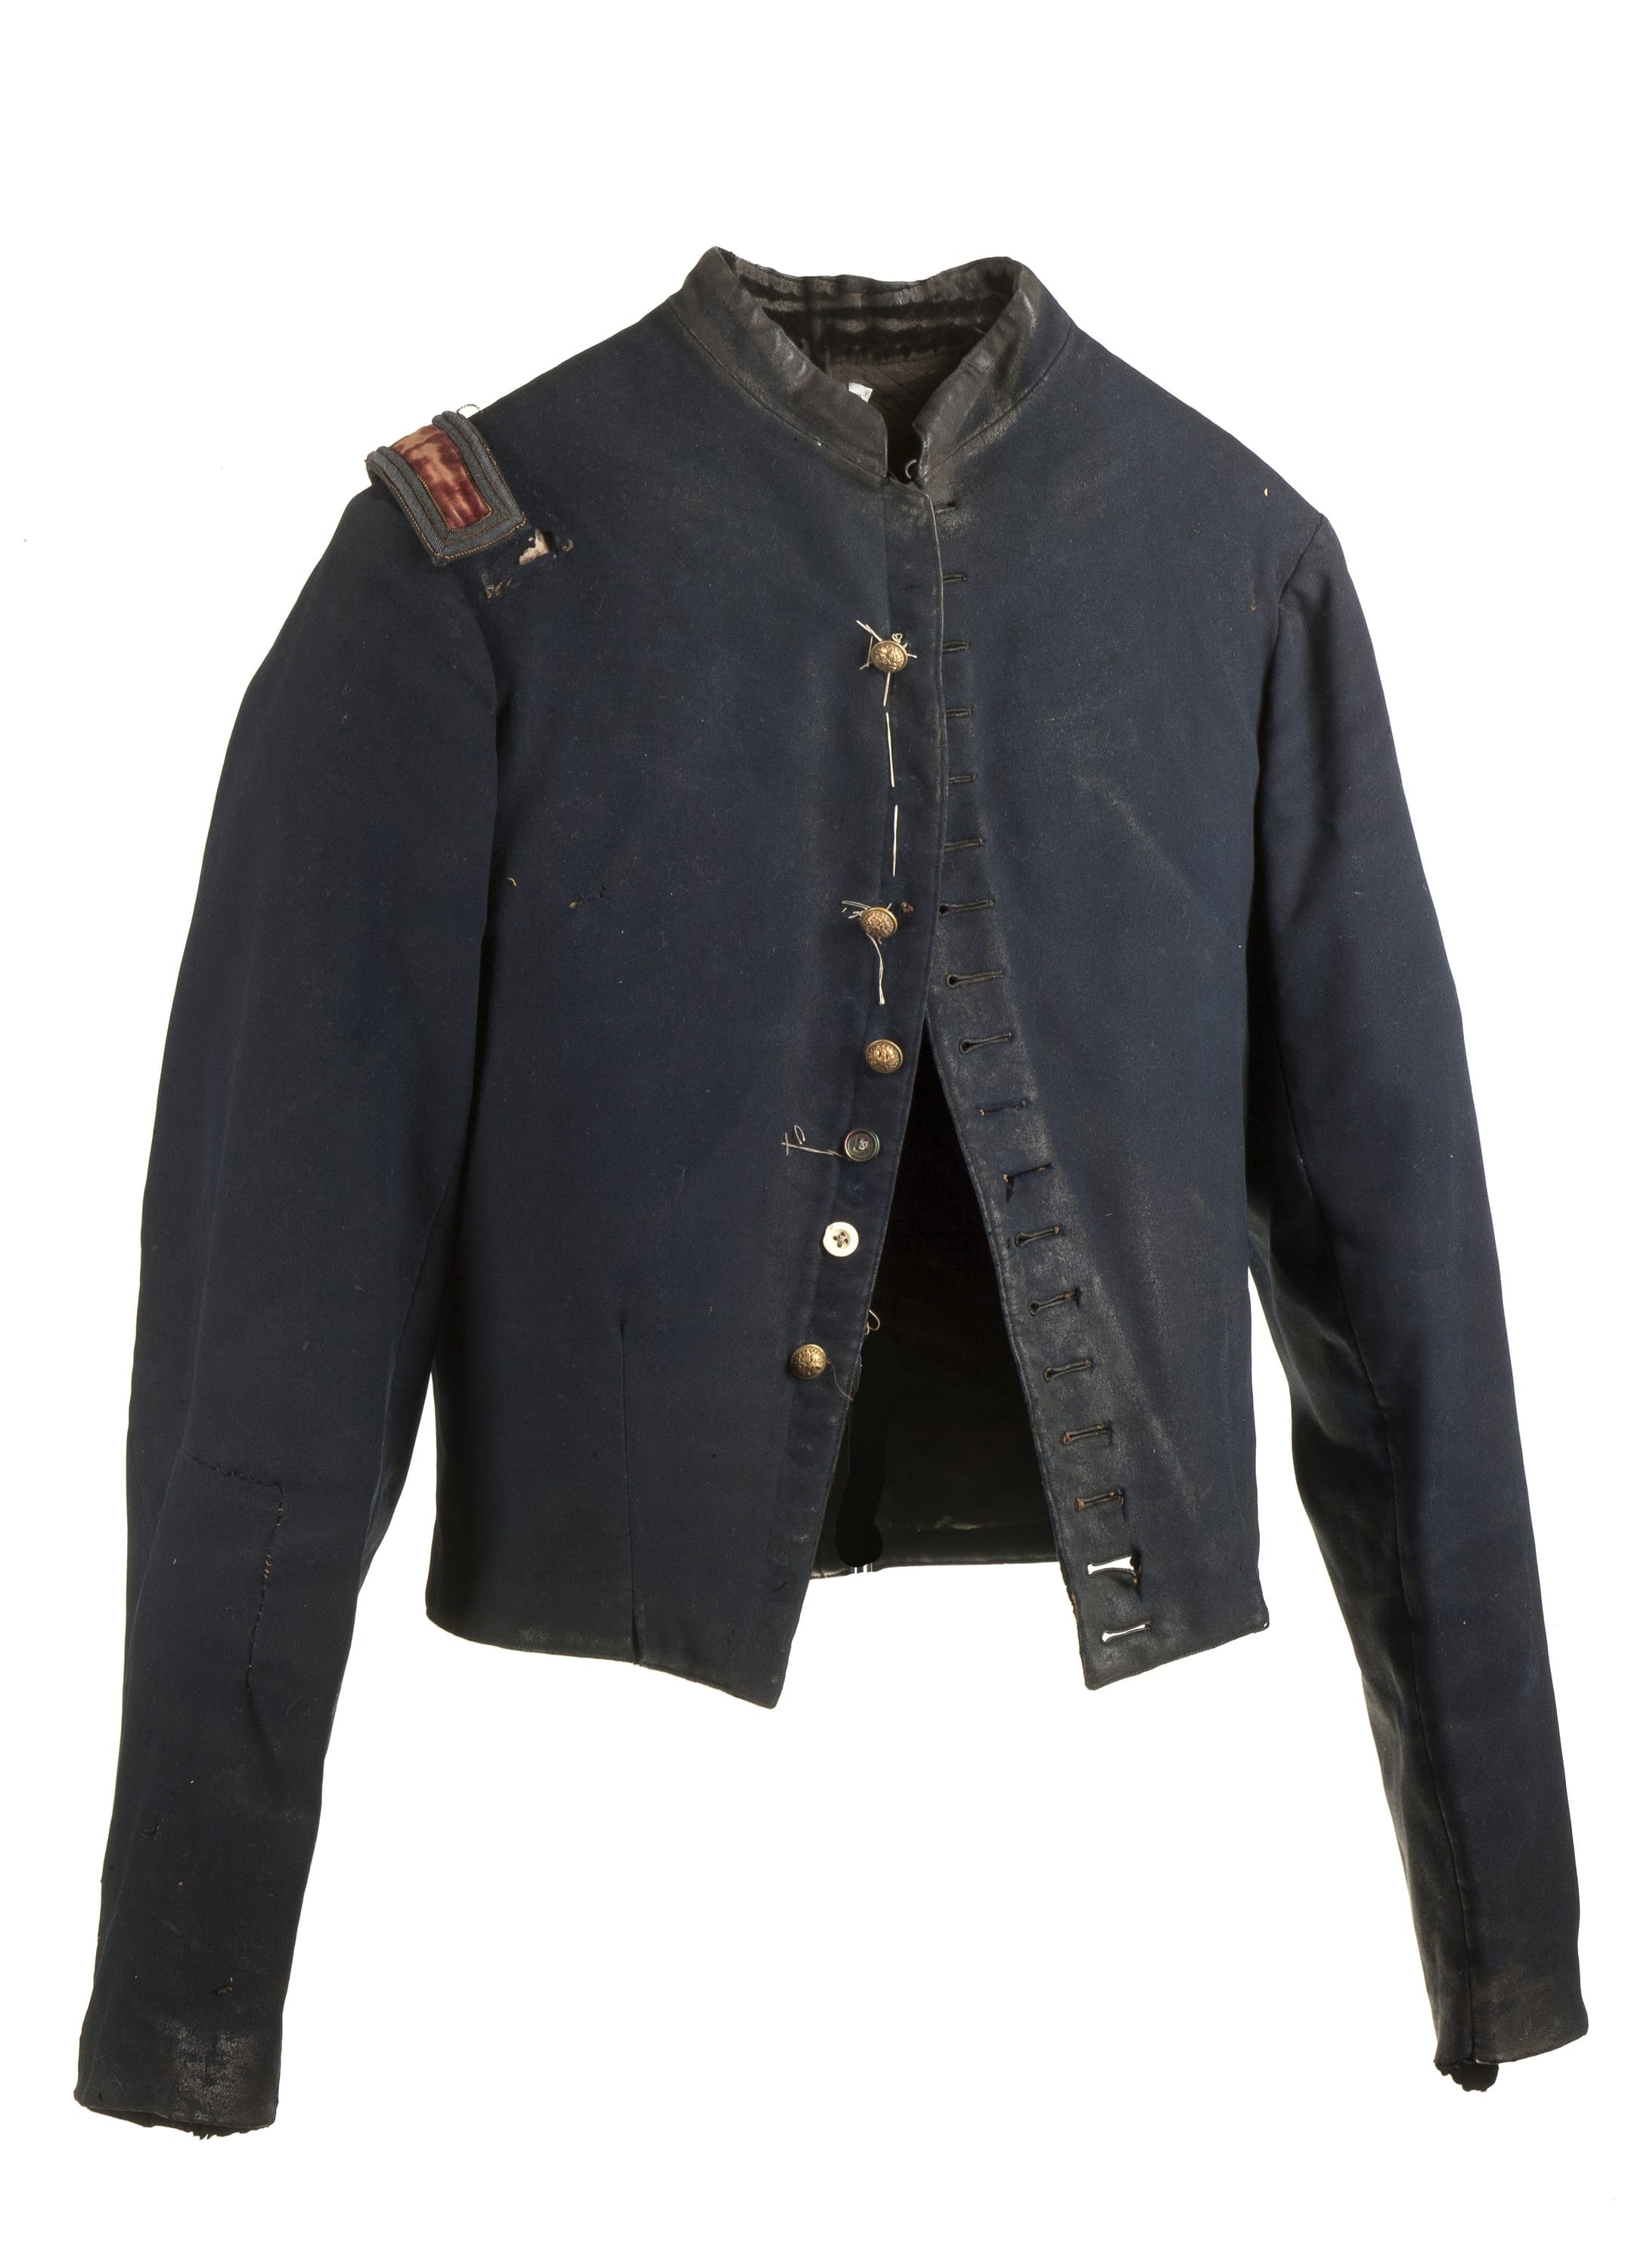 New-York Historical Society
This photo provided by the New-York Historical Society shows a torn and stained field jacket worn by William Henry Shelton, a New York officer, who was captured on May 5, 1864, and wore the jacket during his 10 months of imprisonment and multiple escapes in Georgia and South Carolina. The jacket has been preserved in the same condition it was in at the end of the war, coated in grime and missing many of its brass buttons. A hard-hitting exhibit of quilts, clothing, uniforms and other Civil War era textiles, brings new life and depth to a complicated and heart-wrenching time, in iHomefront and Battlefield: Quilts and Context in the Civil War,i a traveling exhibit on view in New York through August 24, 2014.